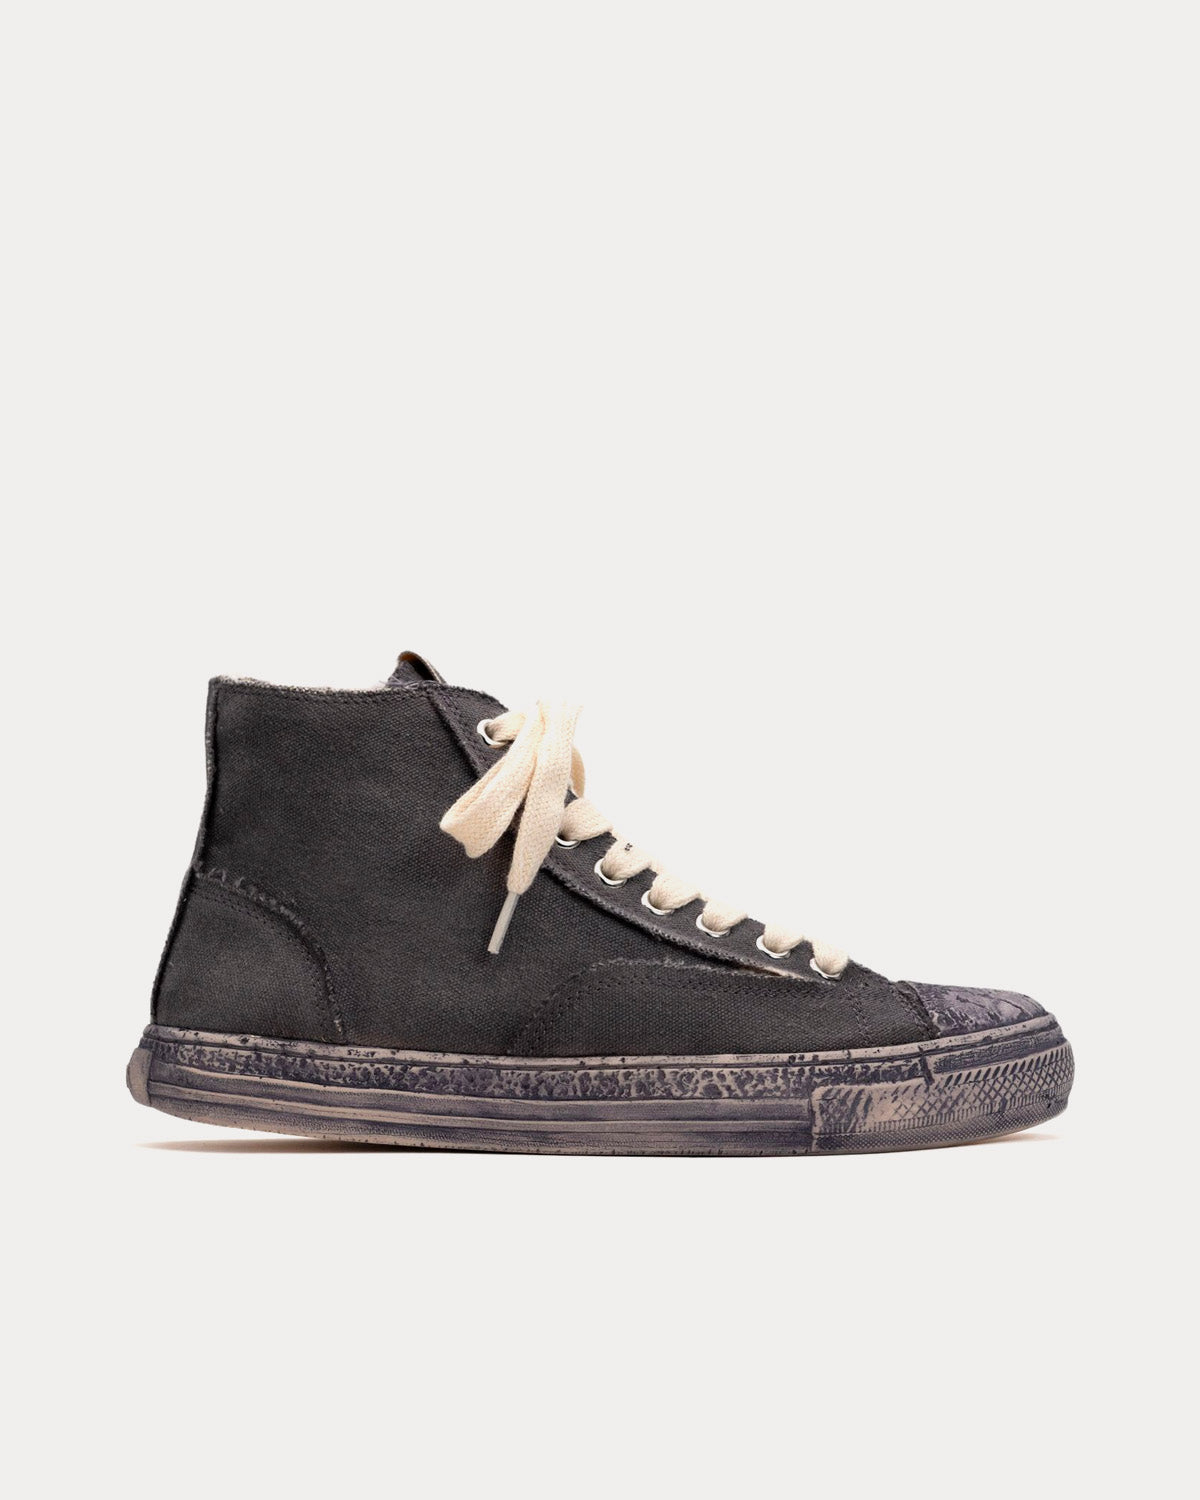 General Scale By Maison Mihara Yasuhiro - Past Sole Overdyed Canvas Black High Top Sneakers